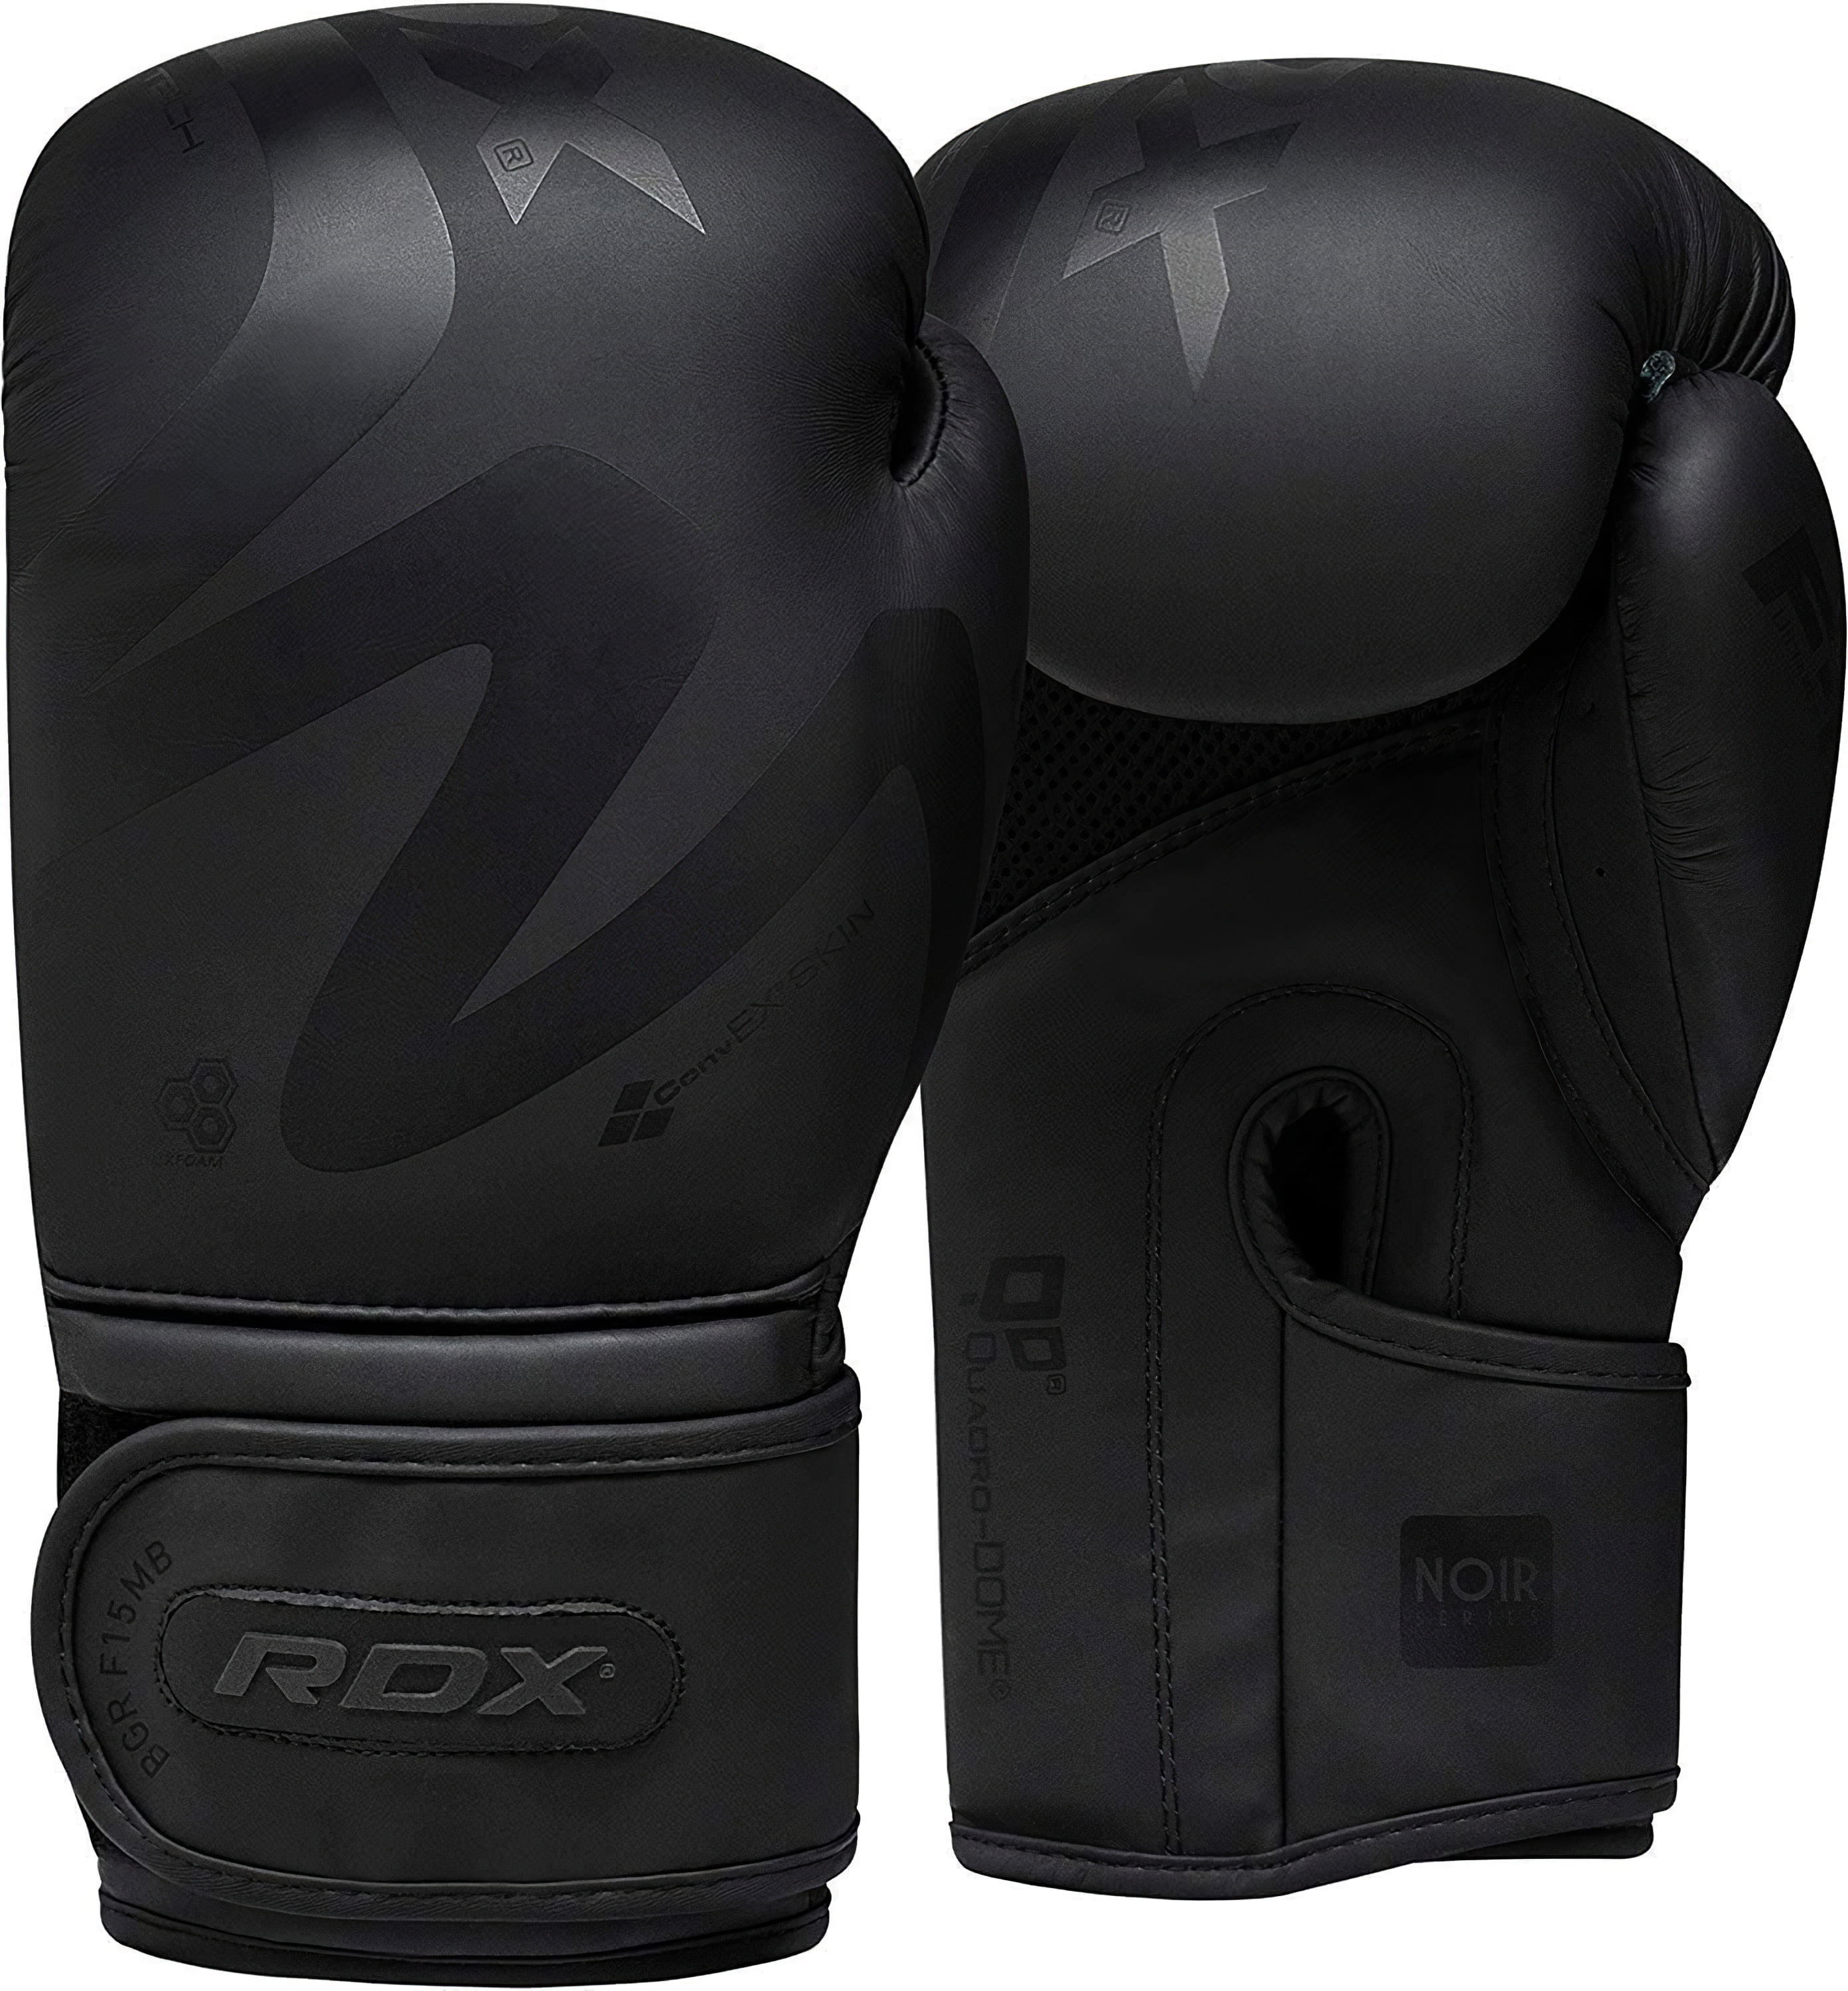 MMA Muay Thai Training Punching Bag Half Mitts Sparring Boxing Gloves Black US 